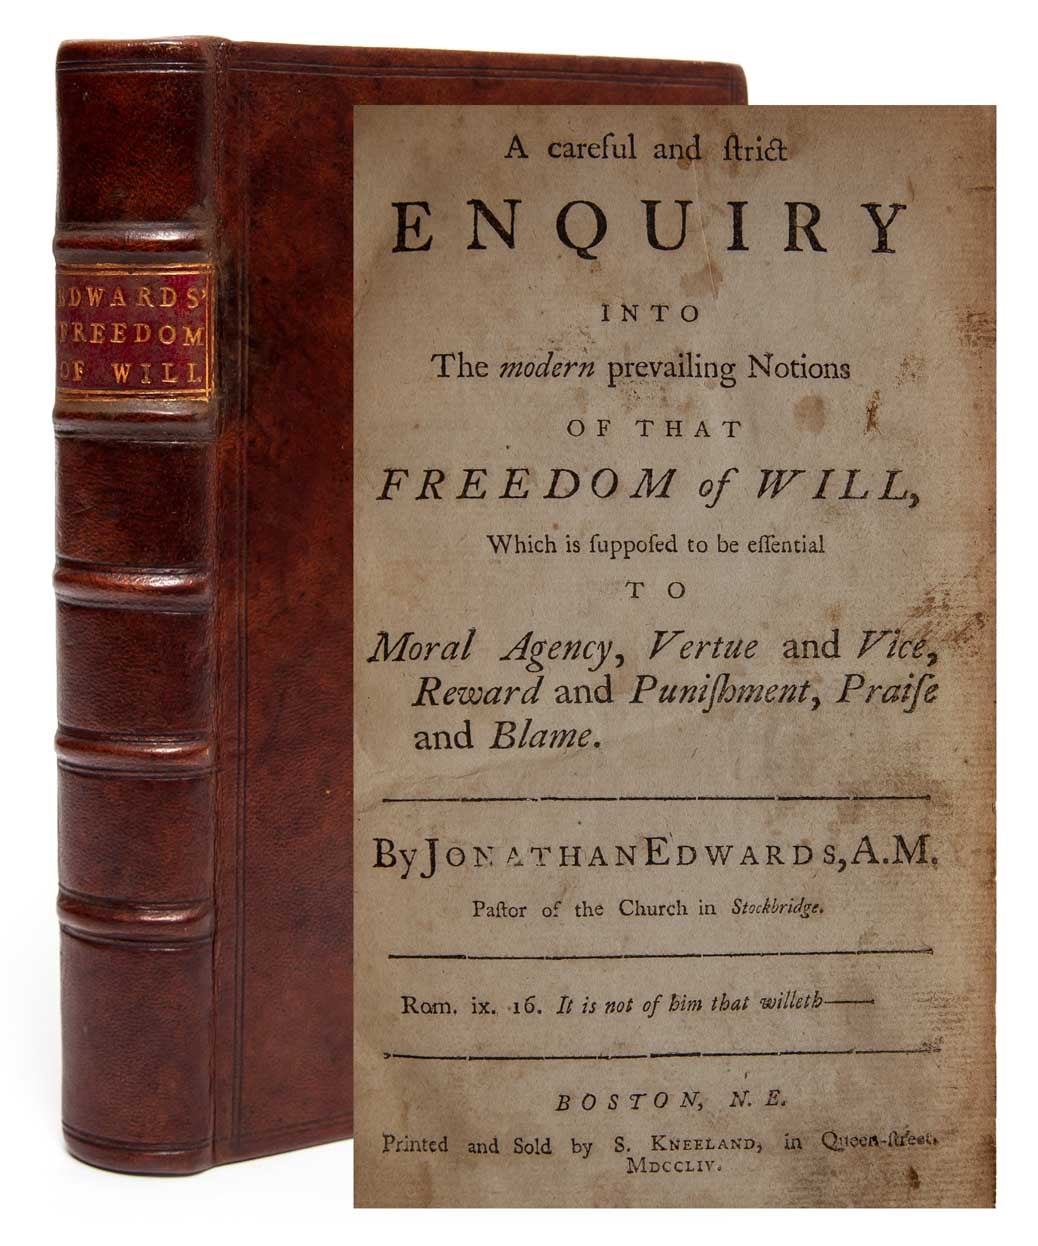 (Item #1843) A Careful and Strict Enquiry into the Modern Prevailing Notions of that Freedom of Will, which is Supposed to be Essential to Moral Agency, Vertue and Vice, Reward and Punishment, Praise and Blame. Jonathan Edwards.